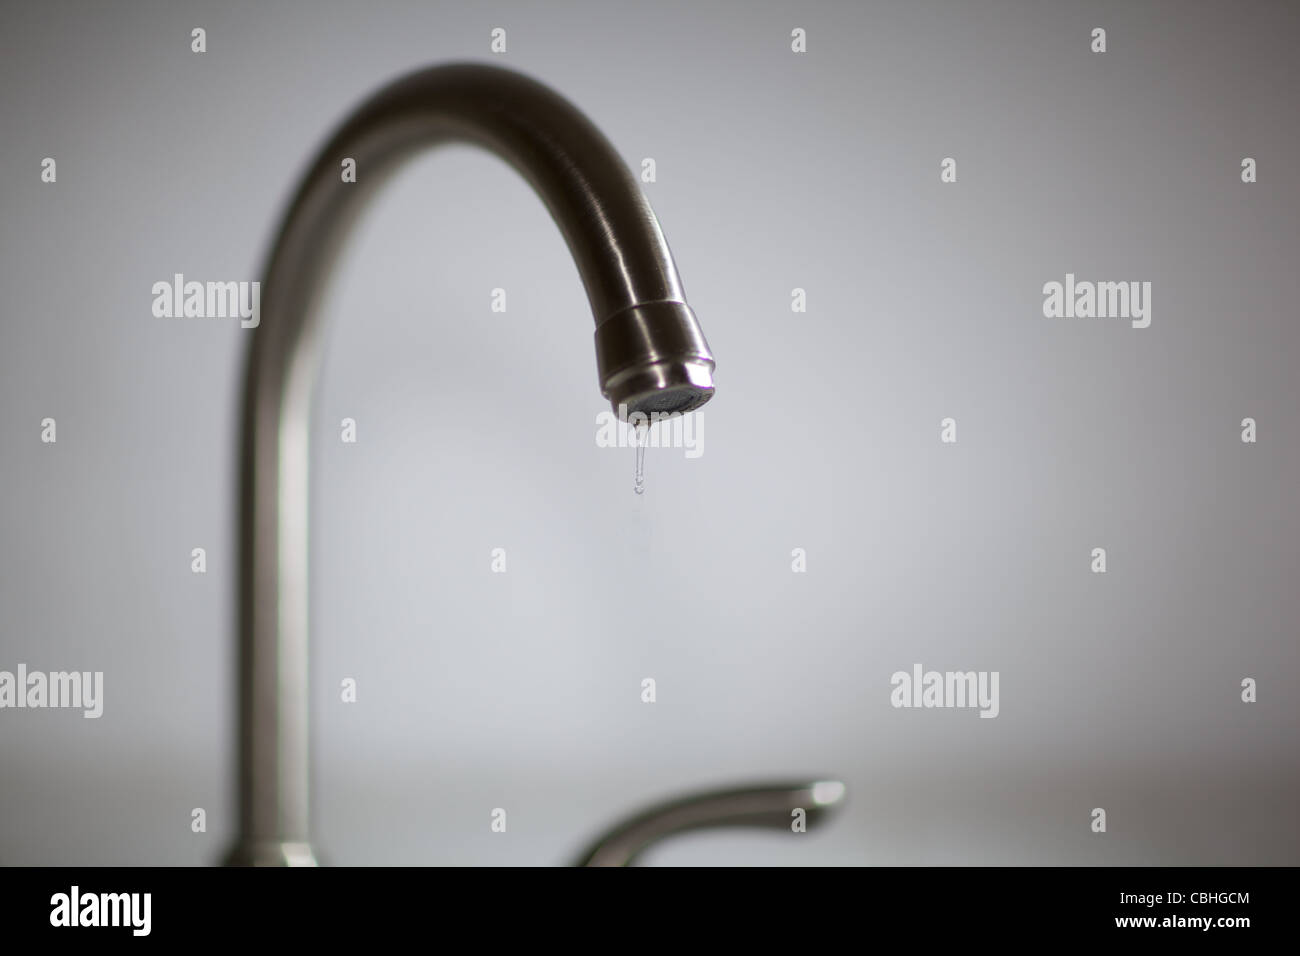 Dripping water faucet Stock Photo